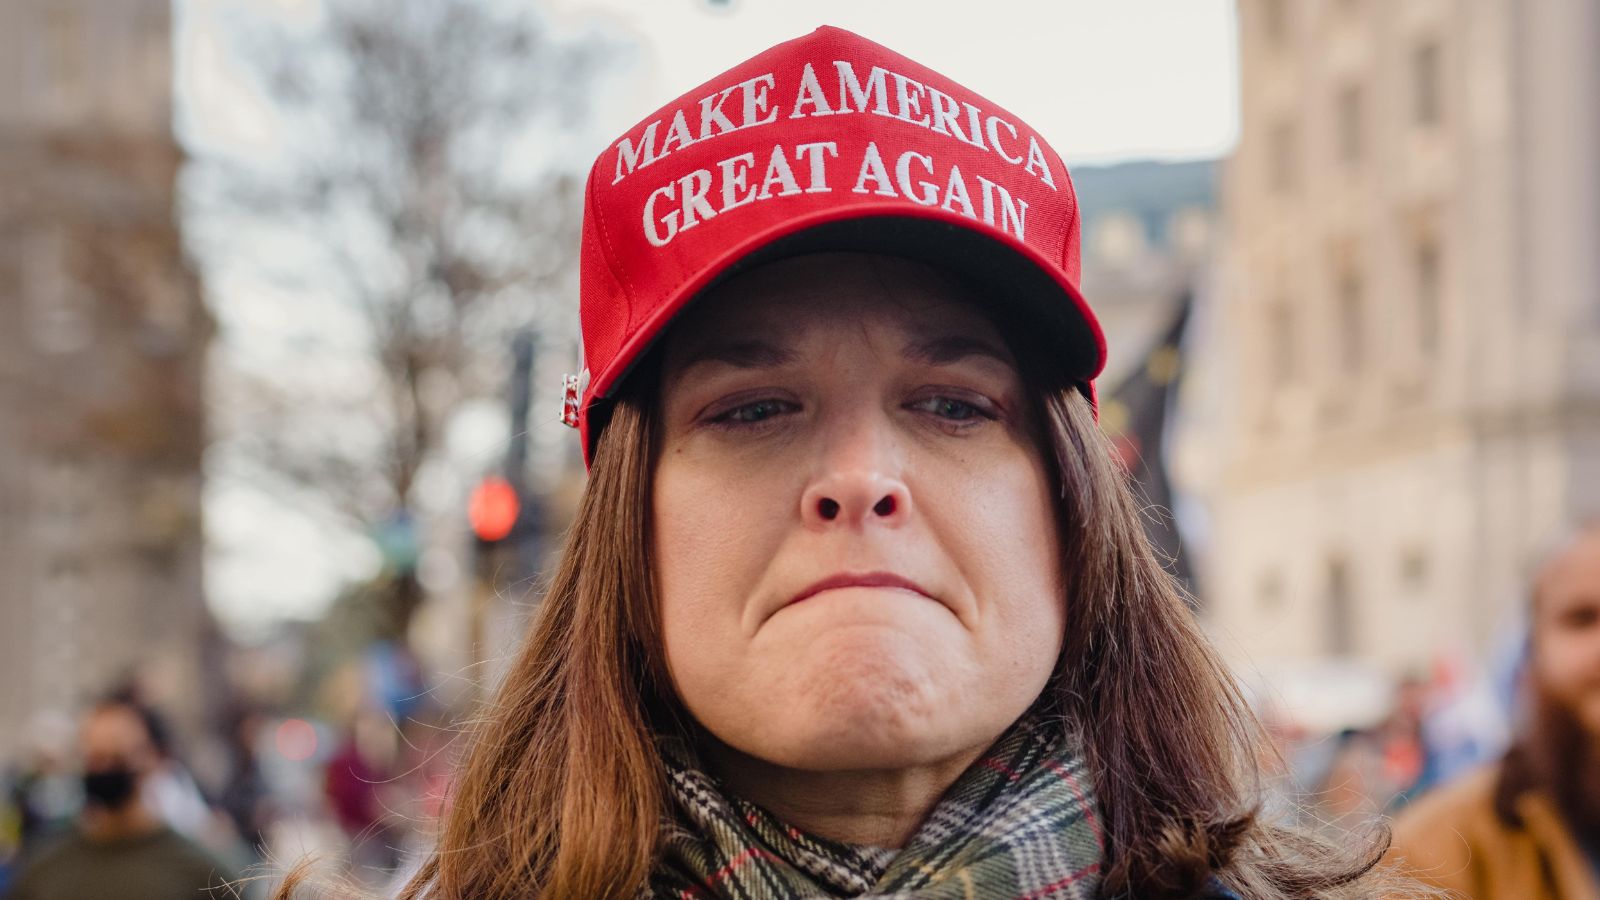 21 Phrases That Indicate You Are a MAGA Supporter